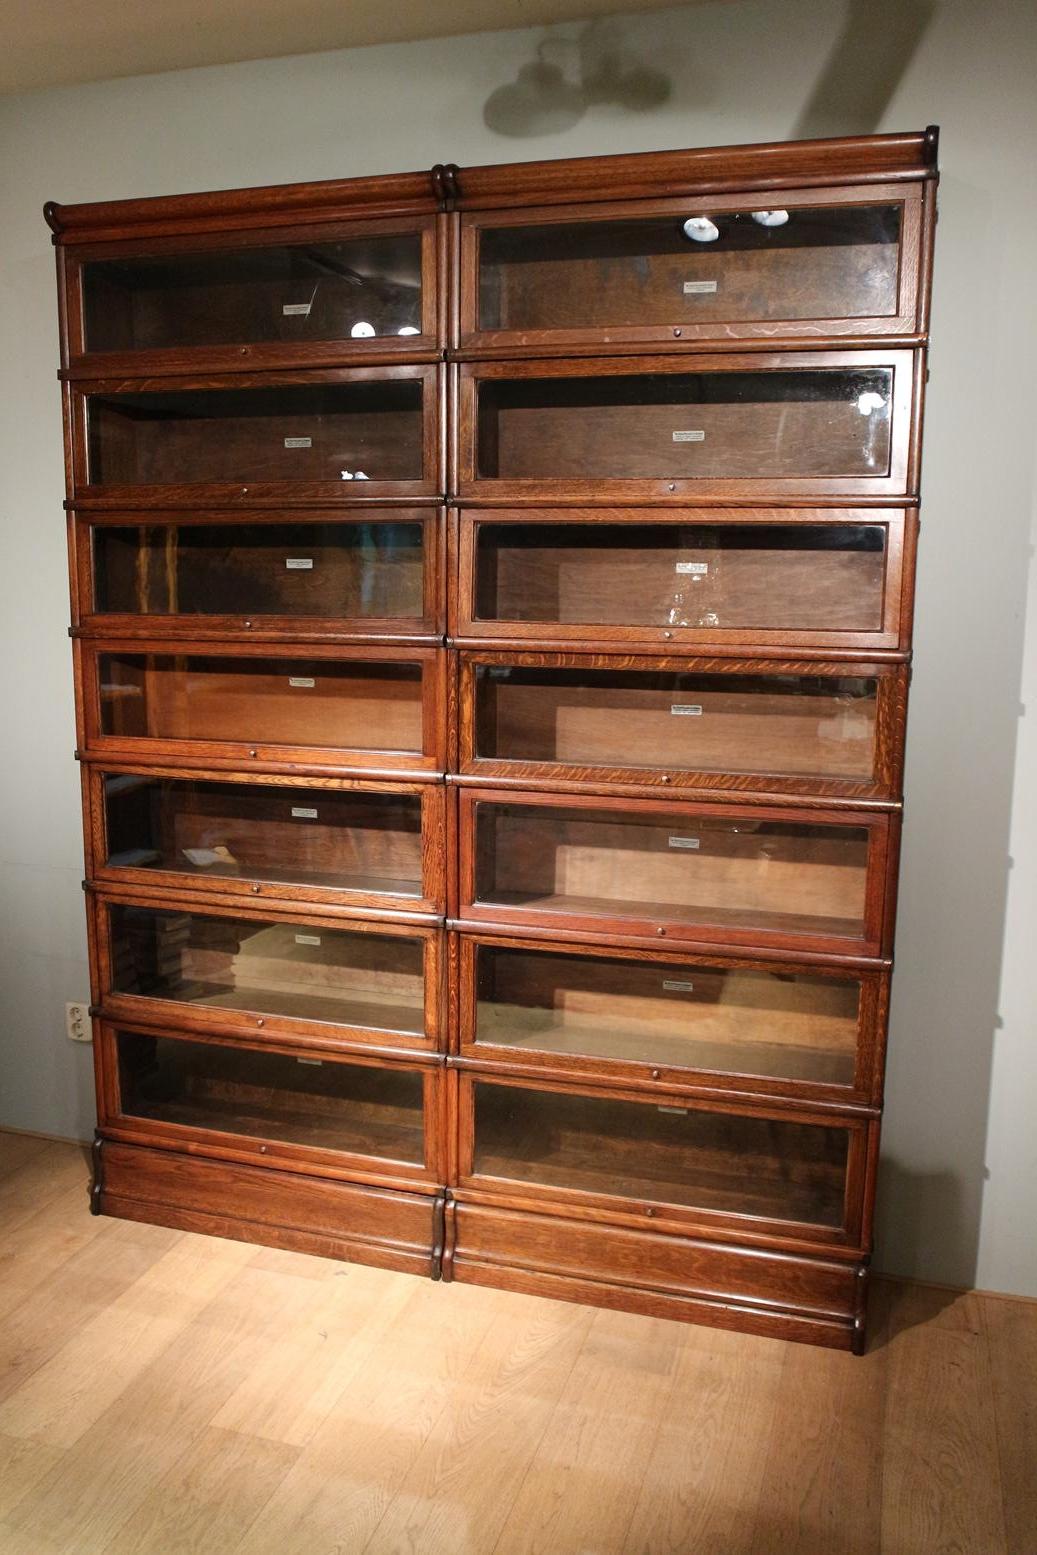 Oak Globe Wernicke bookcase in good original condition. These are stackable bookcases that can be placed in different configurations.

Origin: England, London

Period: 1895-1910

Dimensions W.172 x H. 220 x D.25cm (inner depth 20 cm).